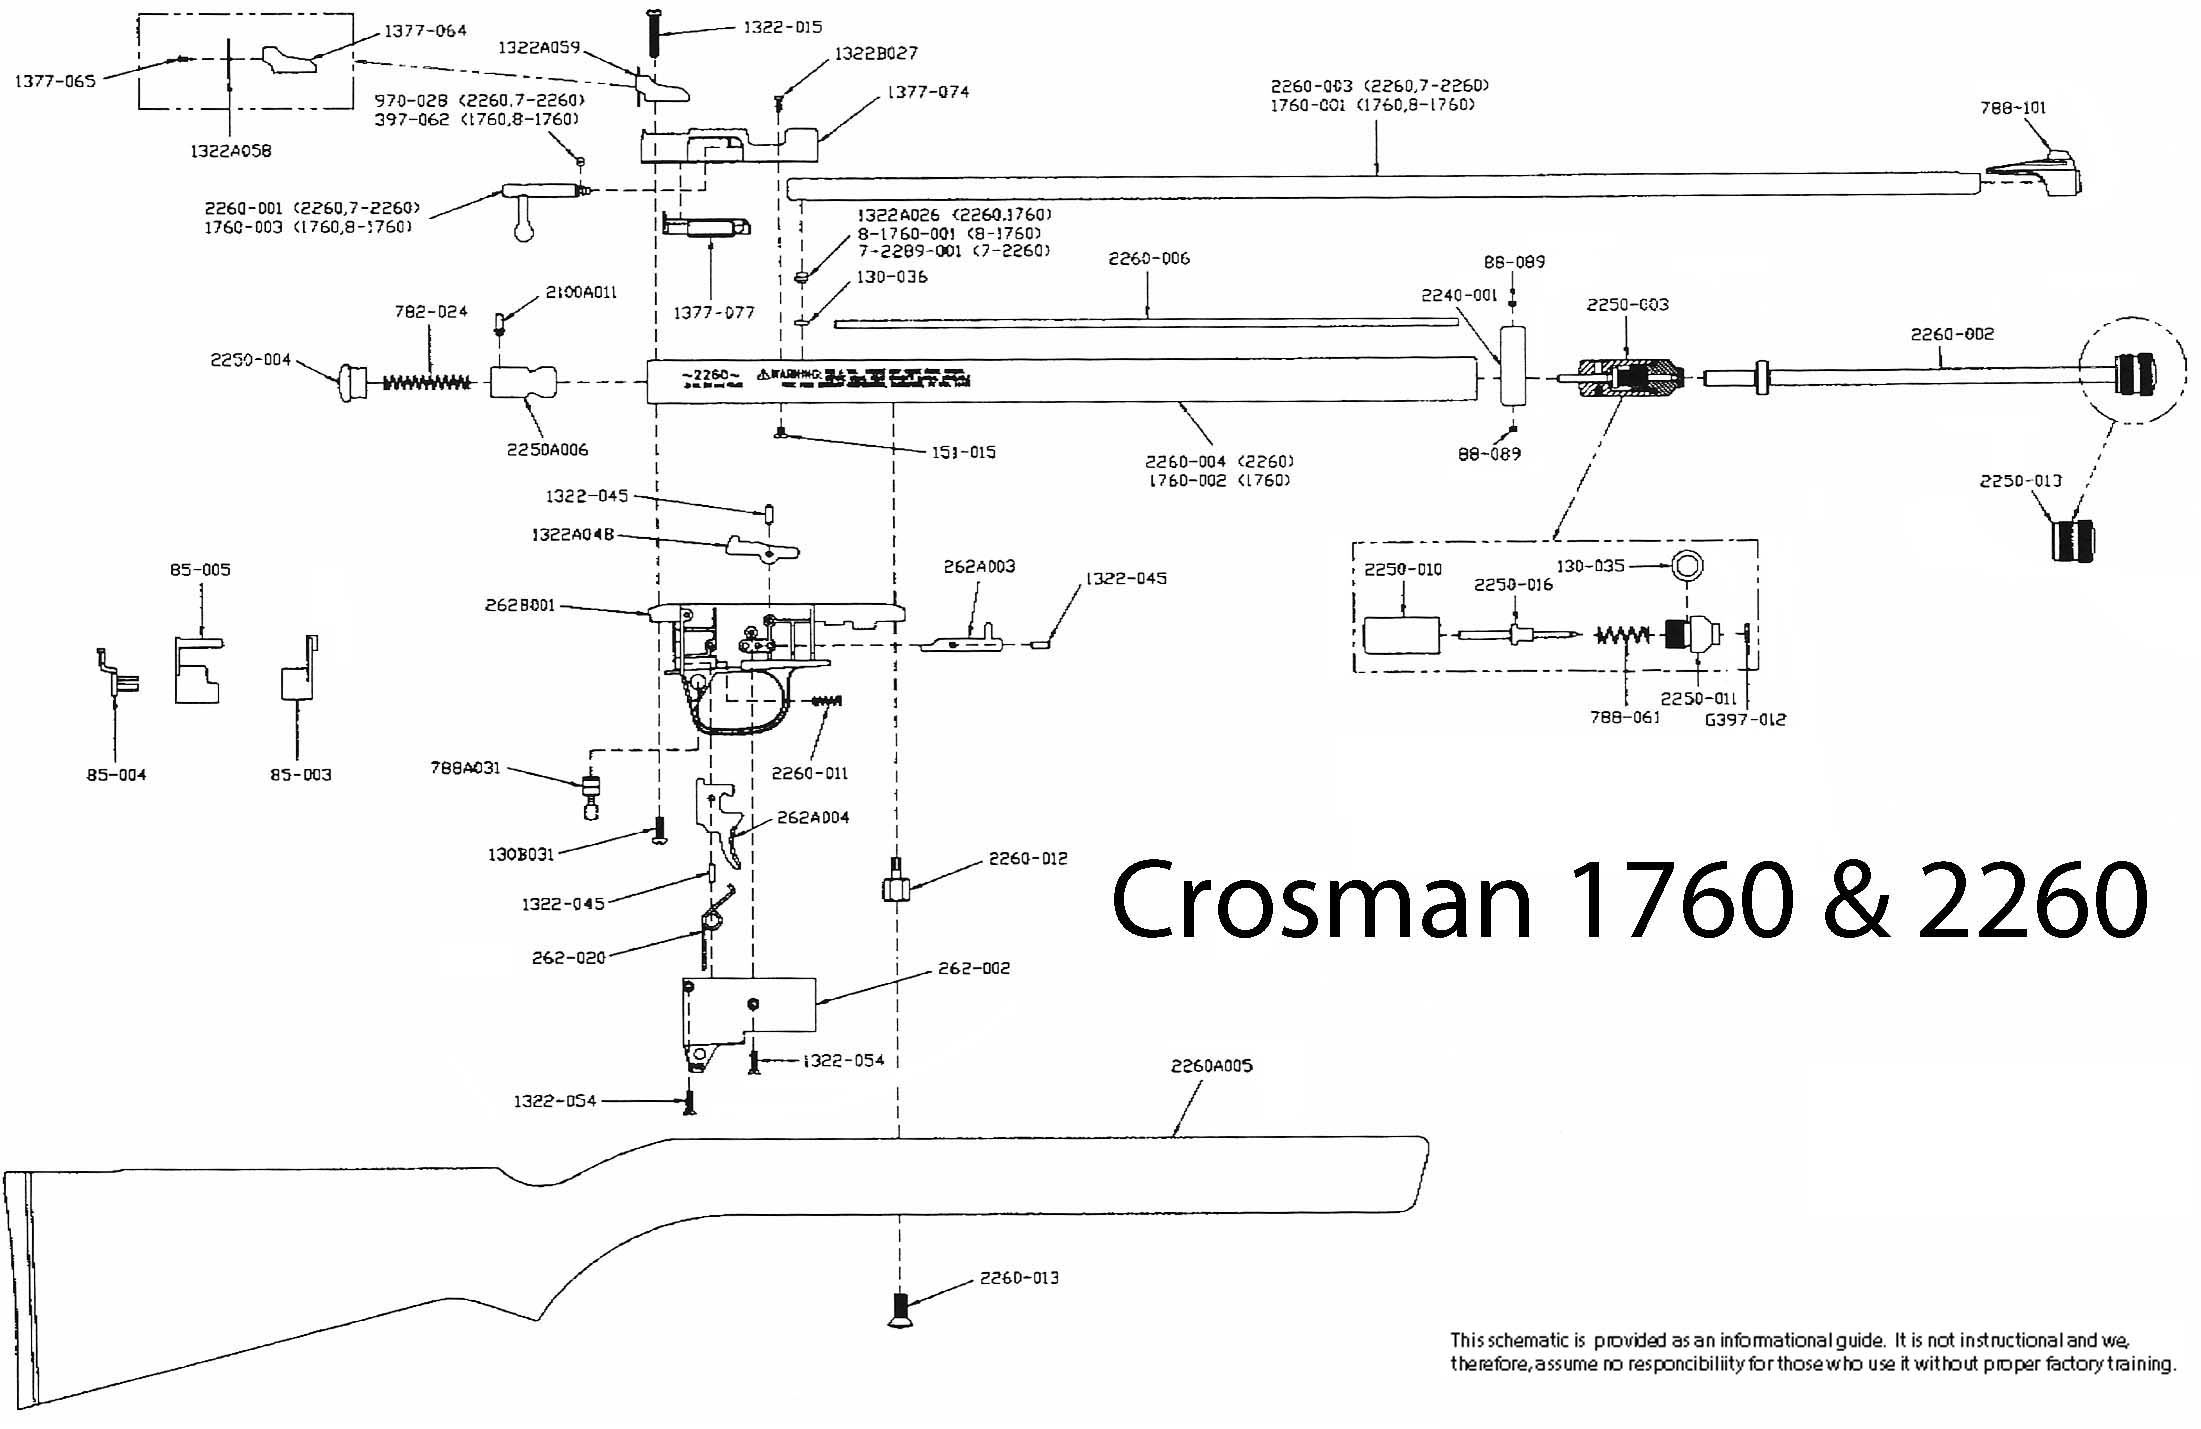 1760 and 2260 Schematic